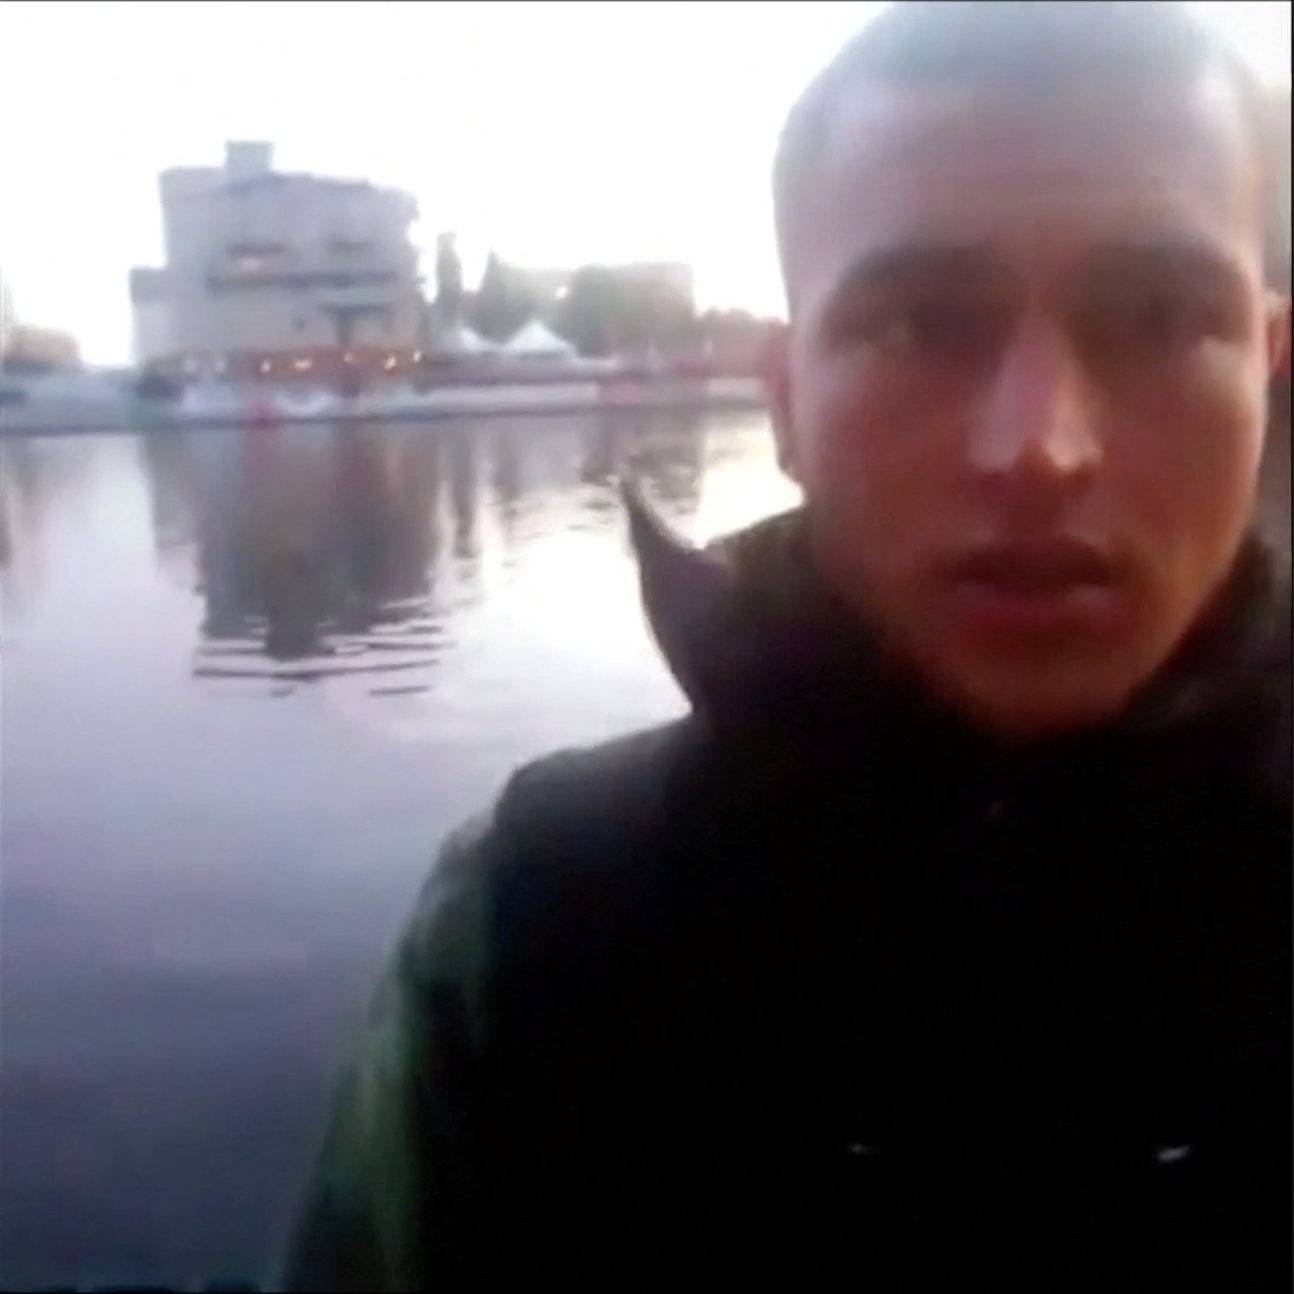 An image grab from a short 'selfie' video clip from a social media website purportedly shows Anis Amri, the Tunisian suspect of the Berlin Christmas market attack, at an unknown location